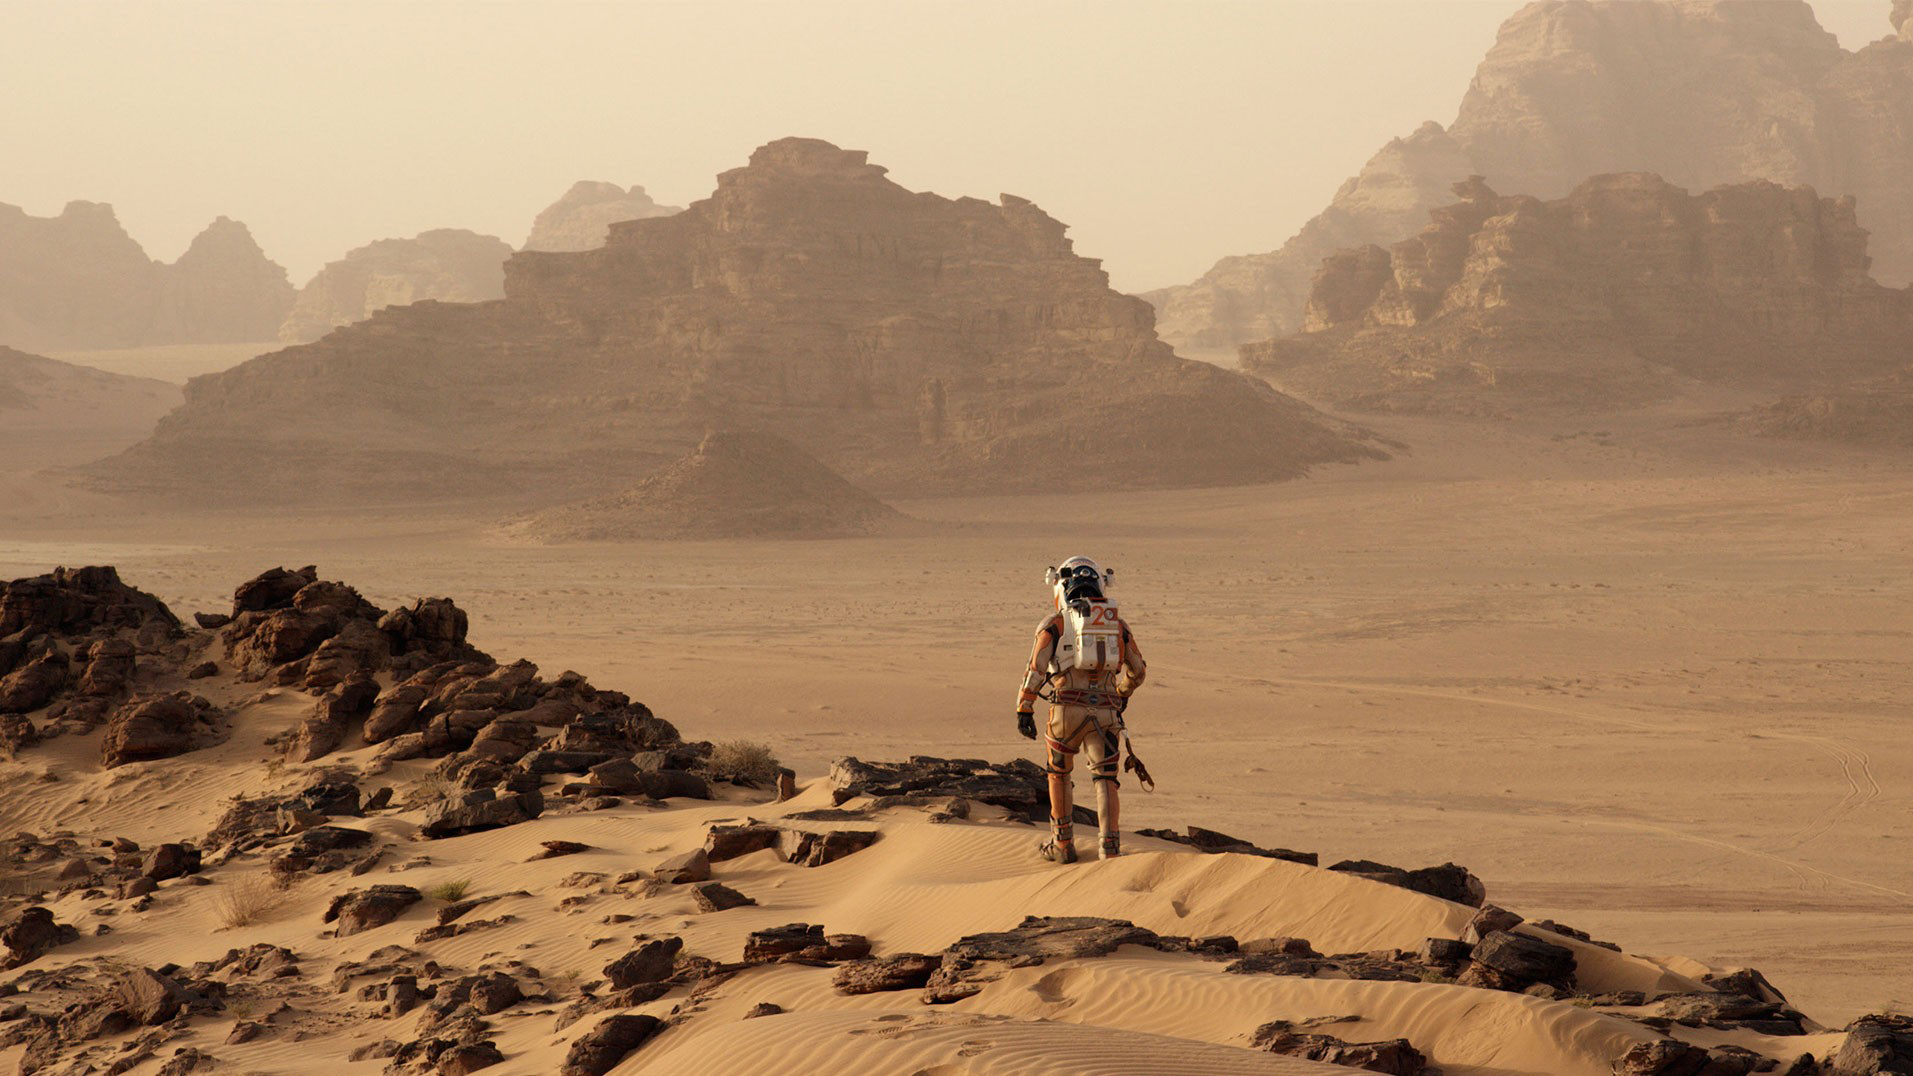 The Martian: Mark Watney (Matt Damon) was left alone on Mars and he was the only person on the planet.